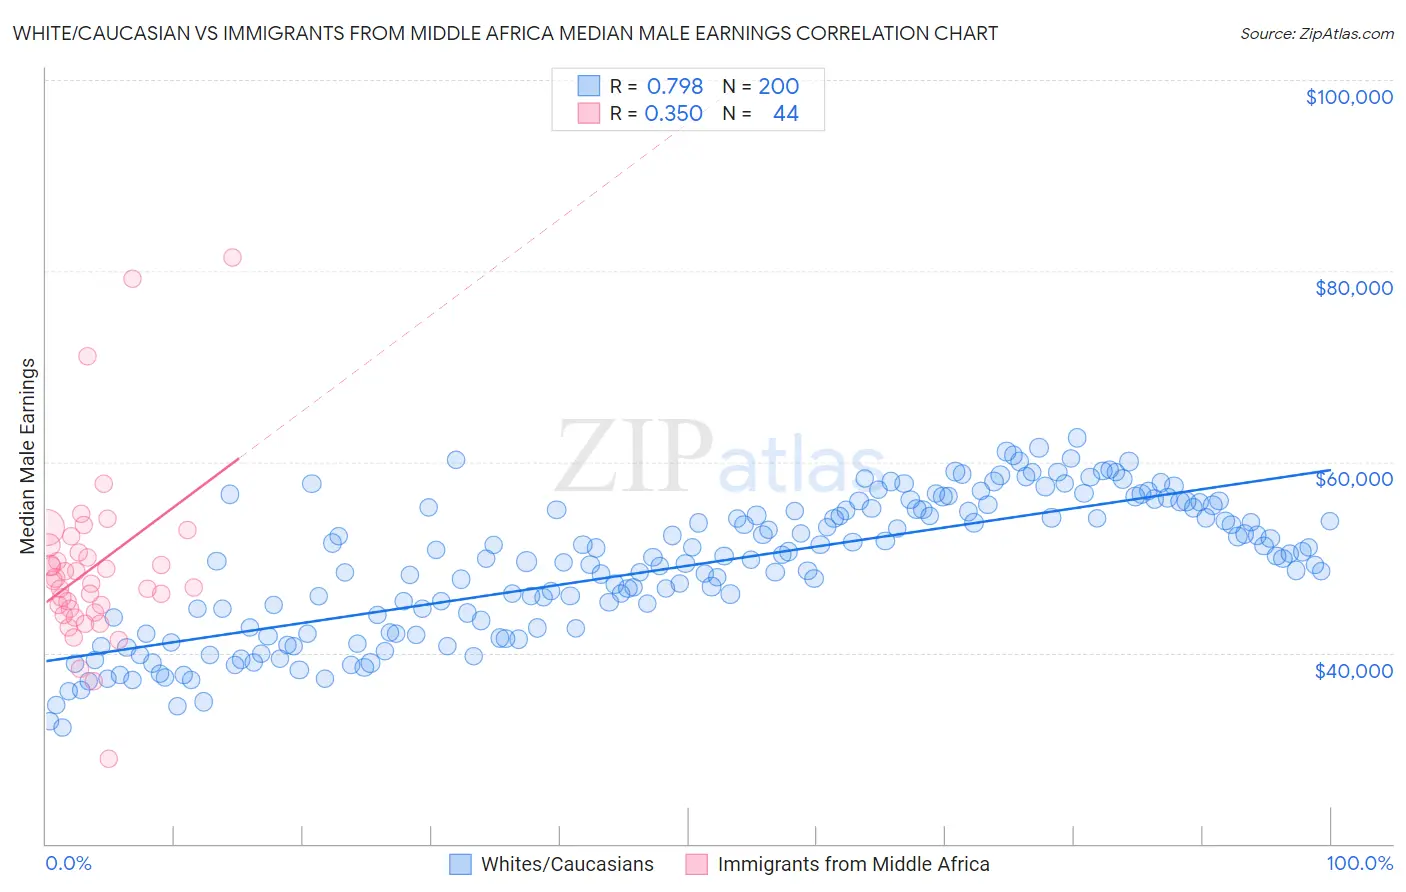 White/Caucasian vs Immigrants from Middle Africa Median Male Earnings